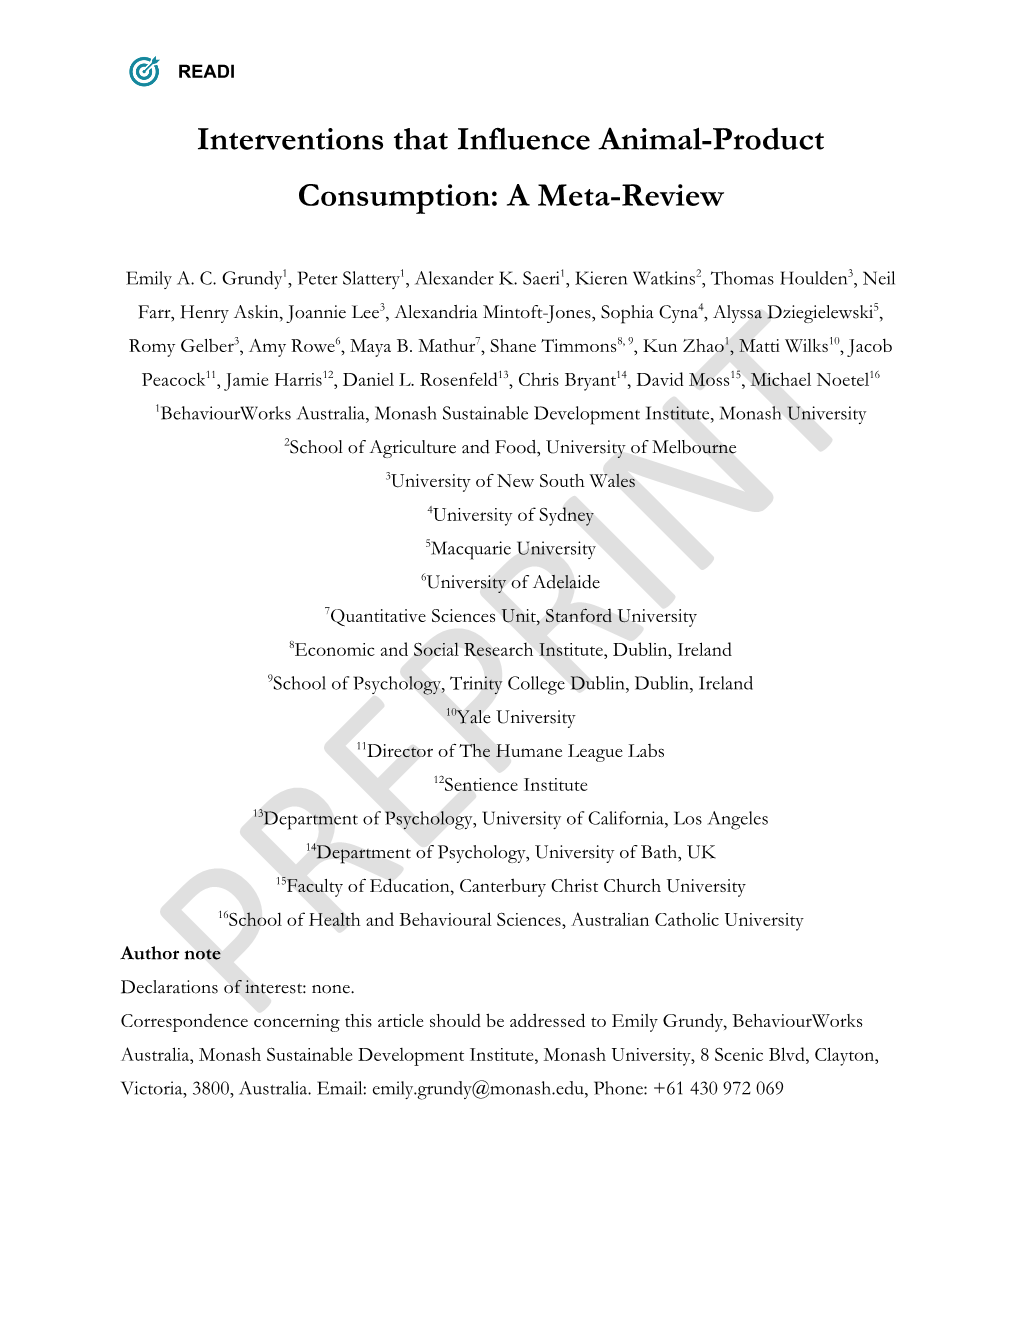 Interventions That Influence Animal-Product Consumption: a Meta-Review